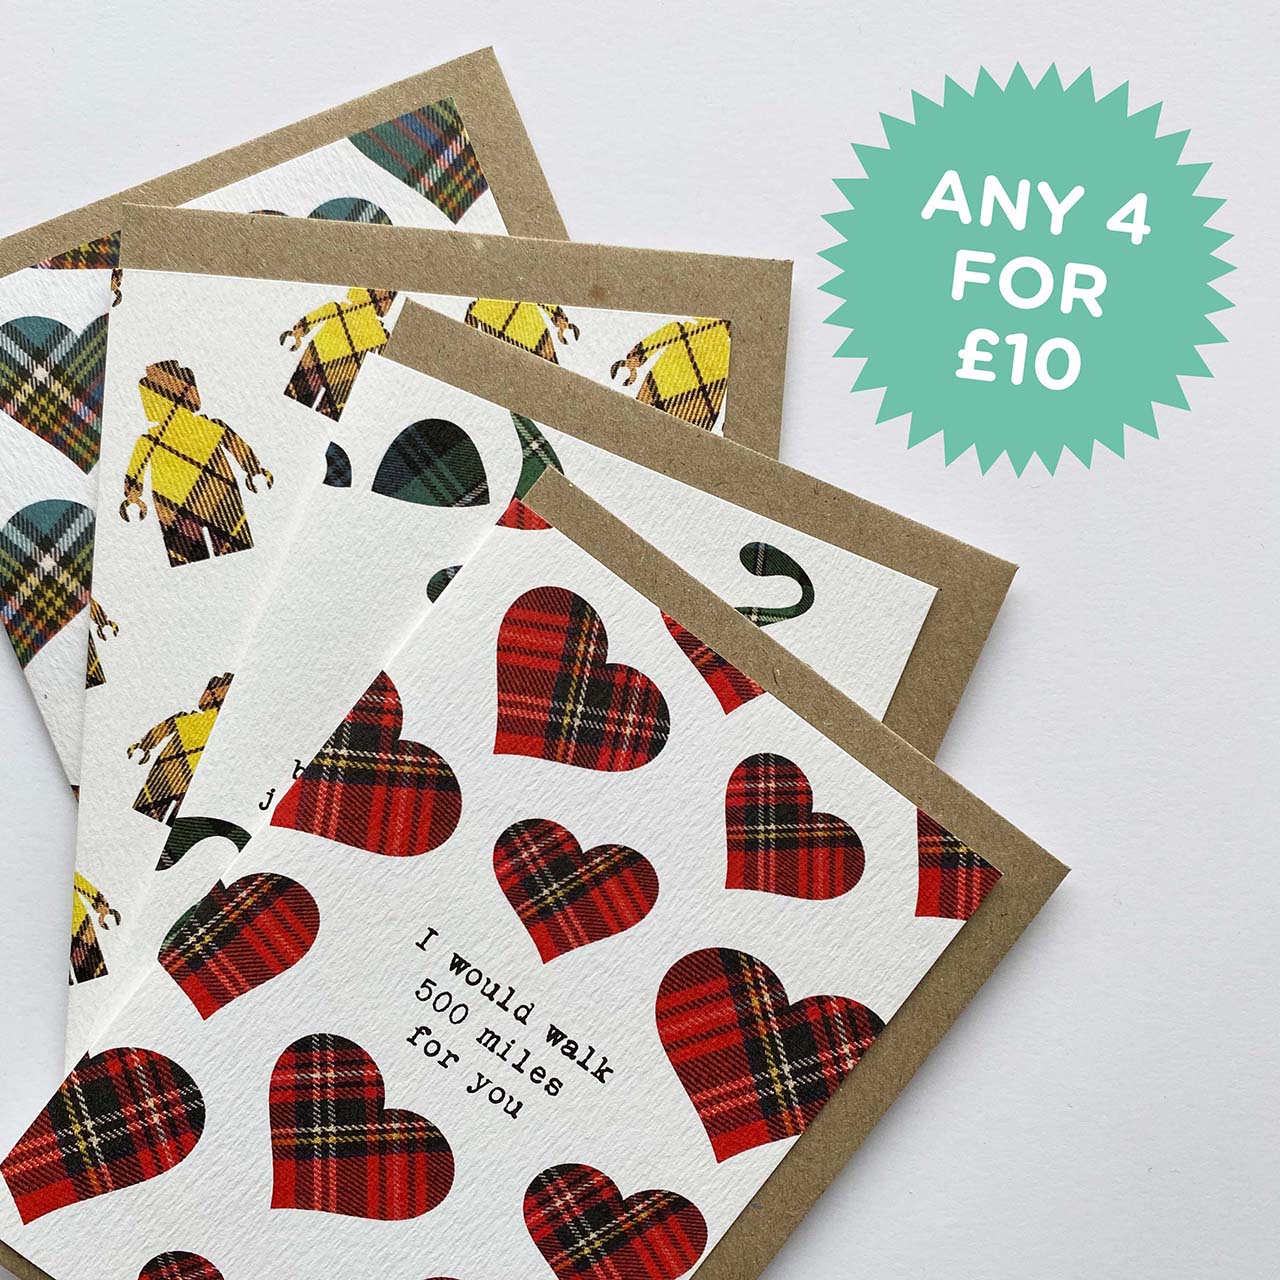 scottish greeting cards with tartan designs and deal 4 for £10